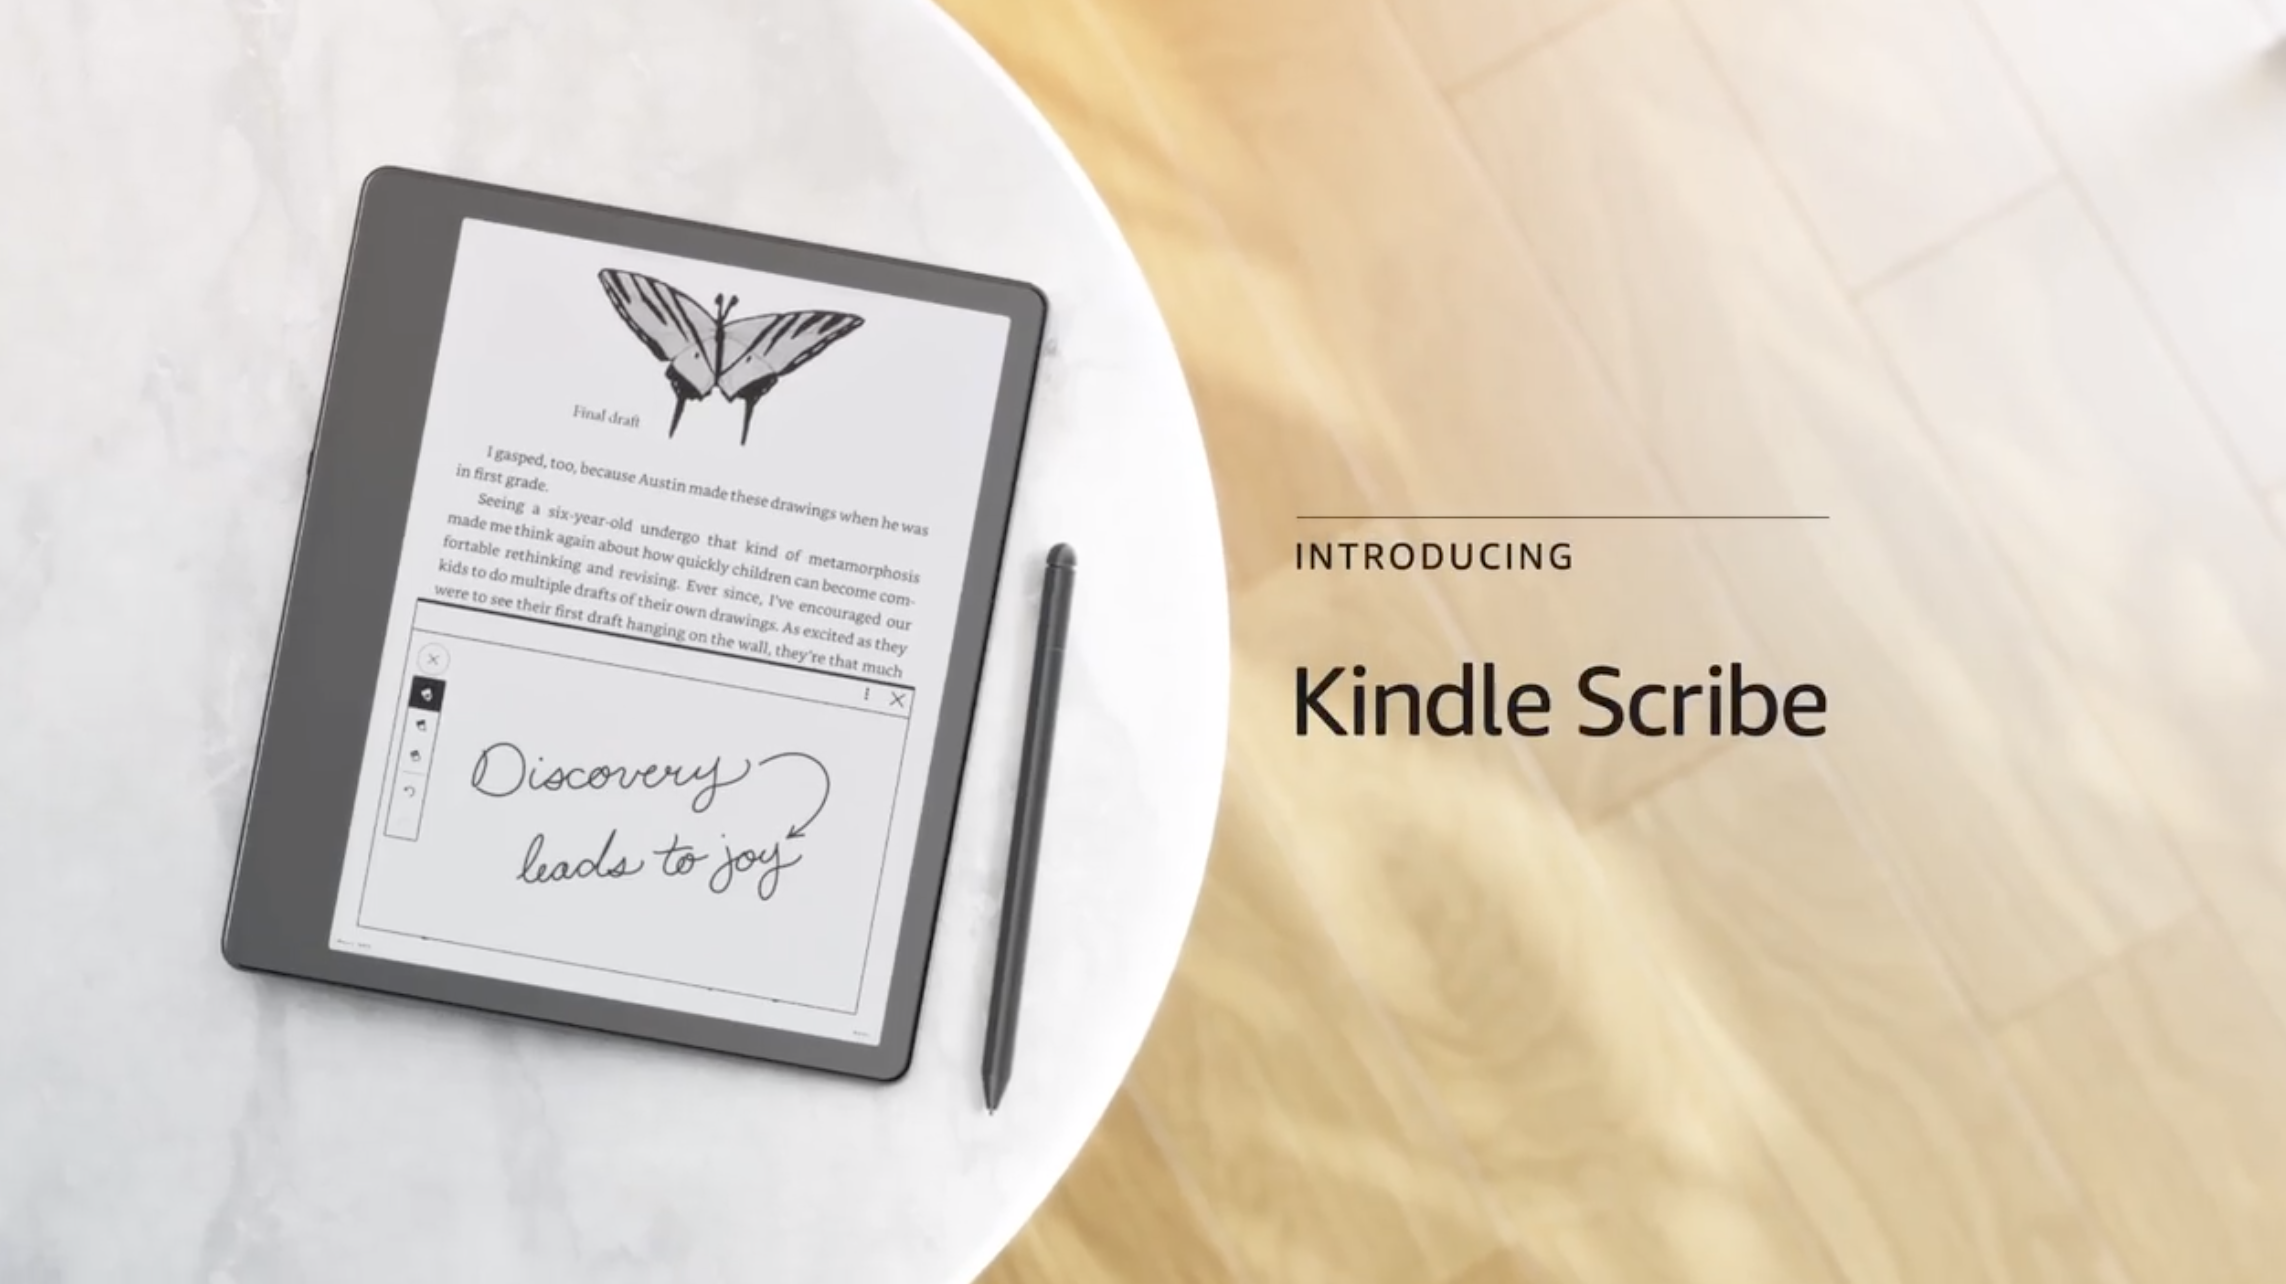 Kindle Scribe at Amazon Event